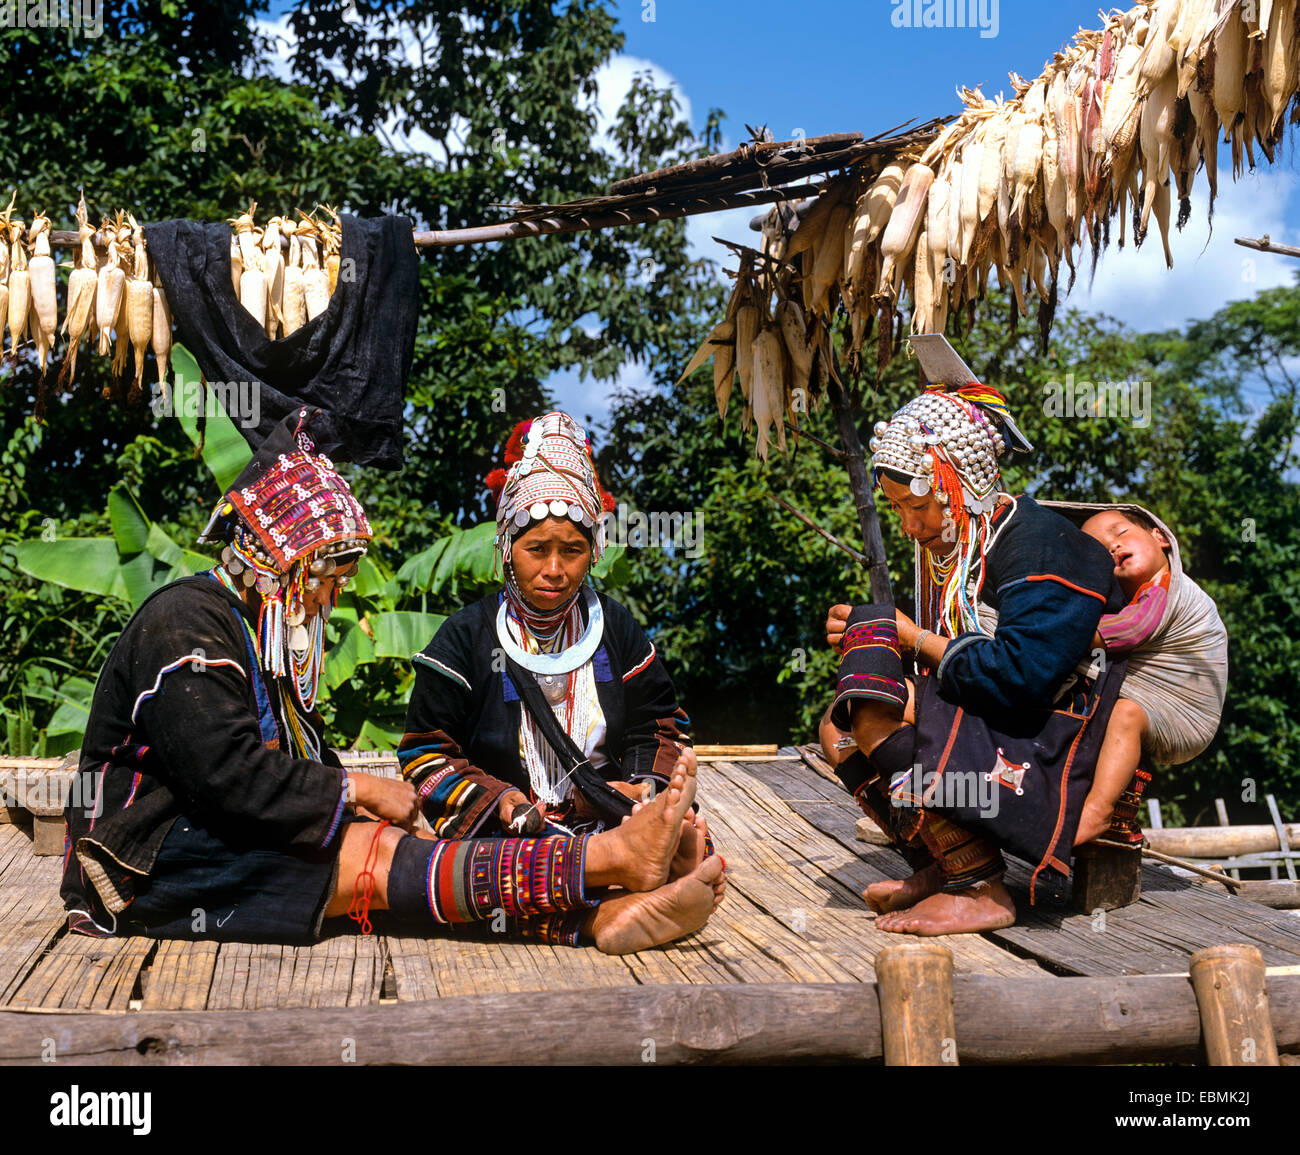 Akha women in a mountain village, in traditional costume and headdresses with silver coins, one carrying a sleeping child in a Stock Photo